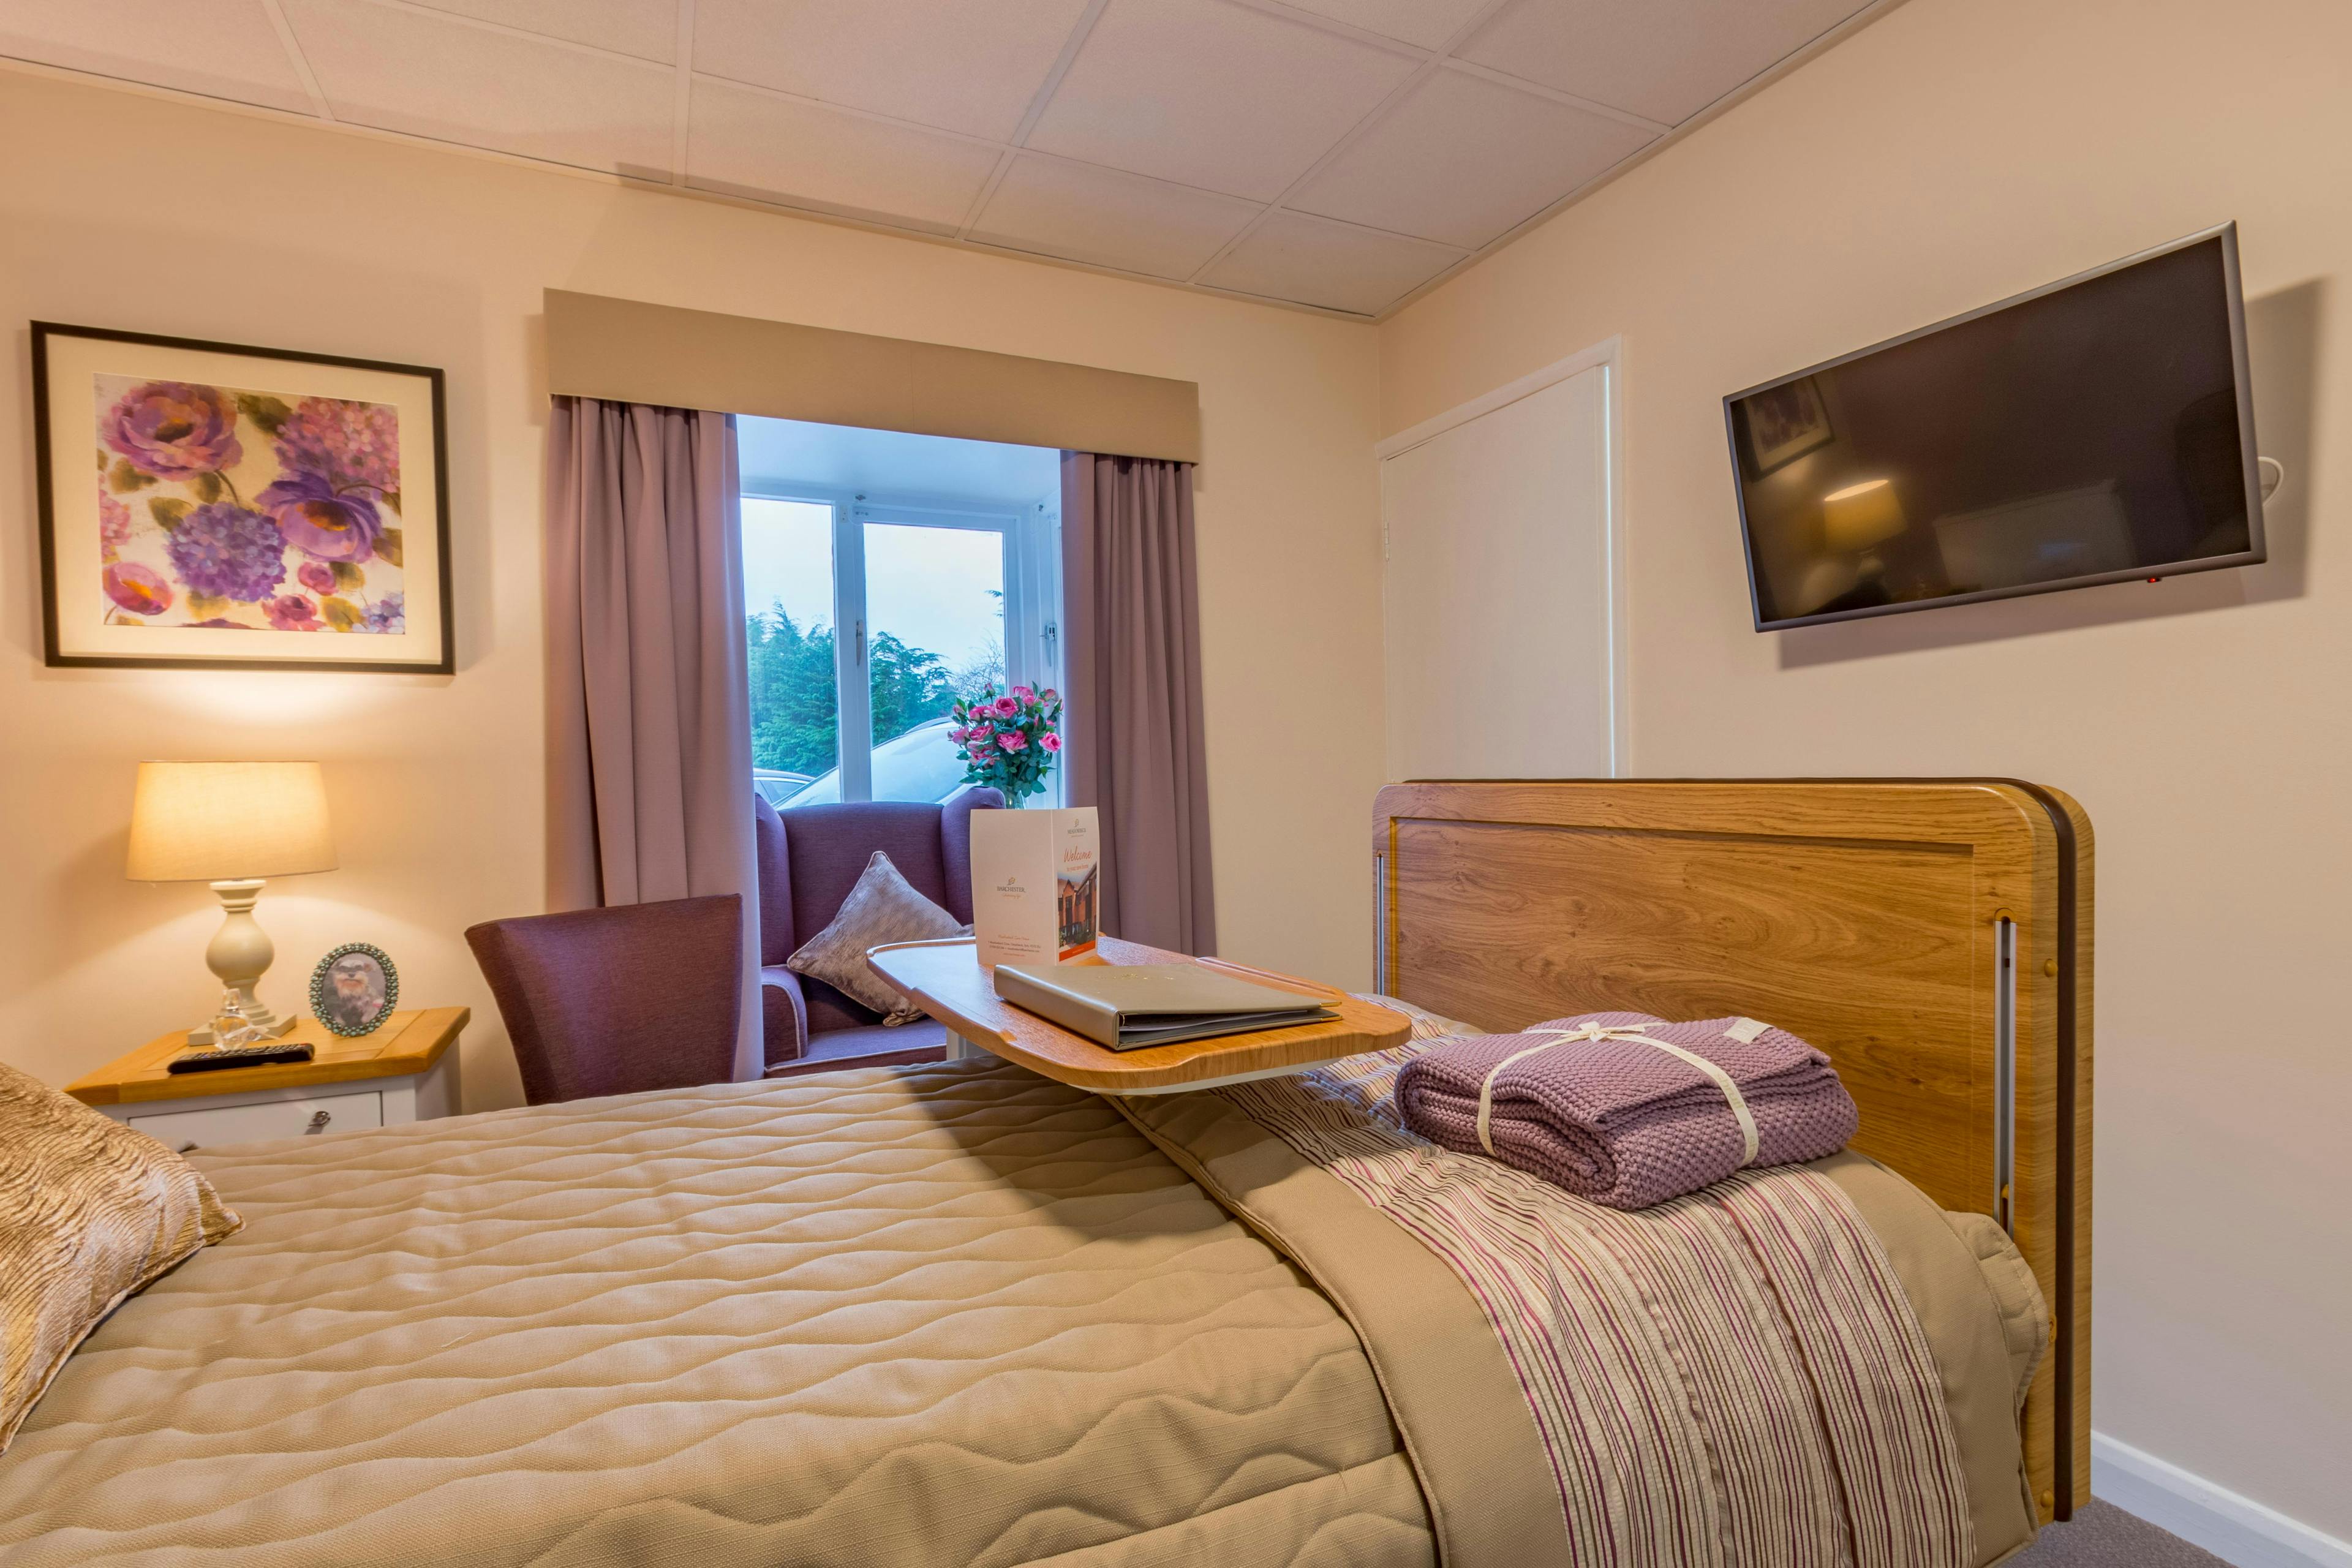 Bedroom at Meadowbeck Care Home in York, North Yorkshire